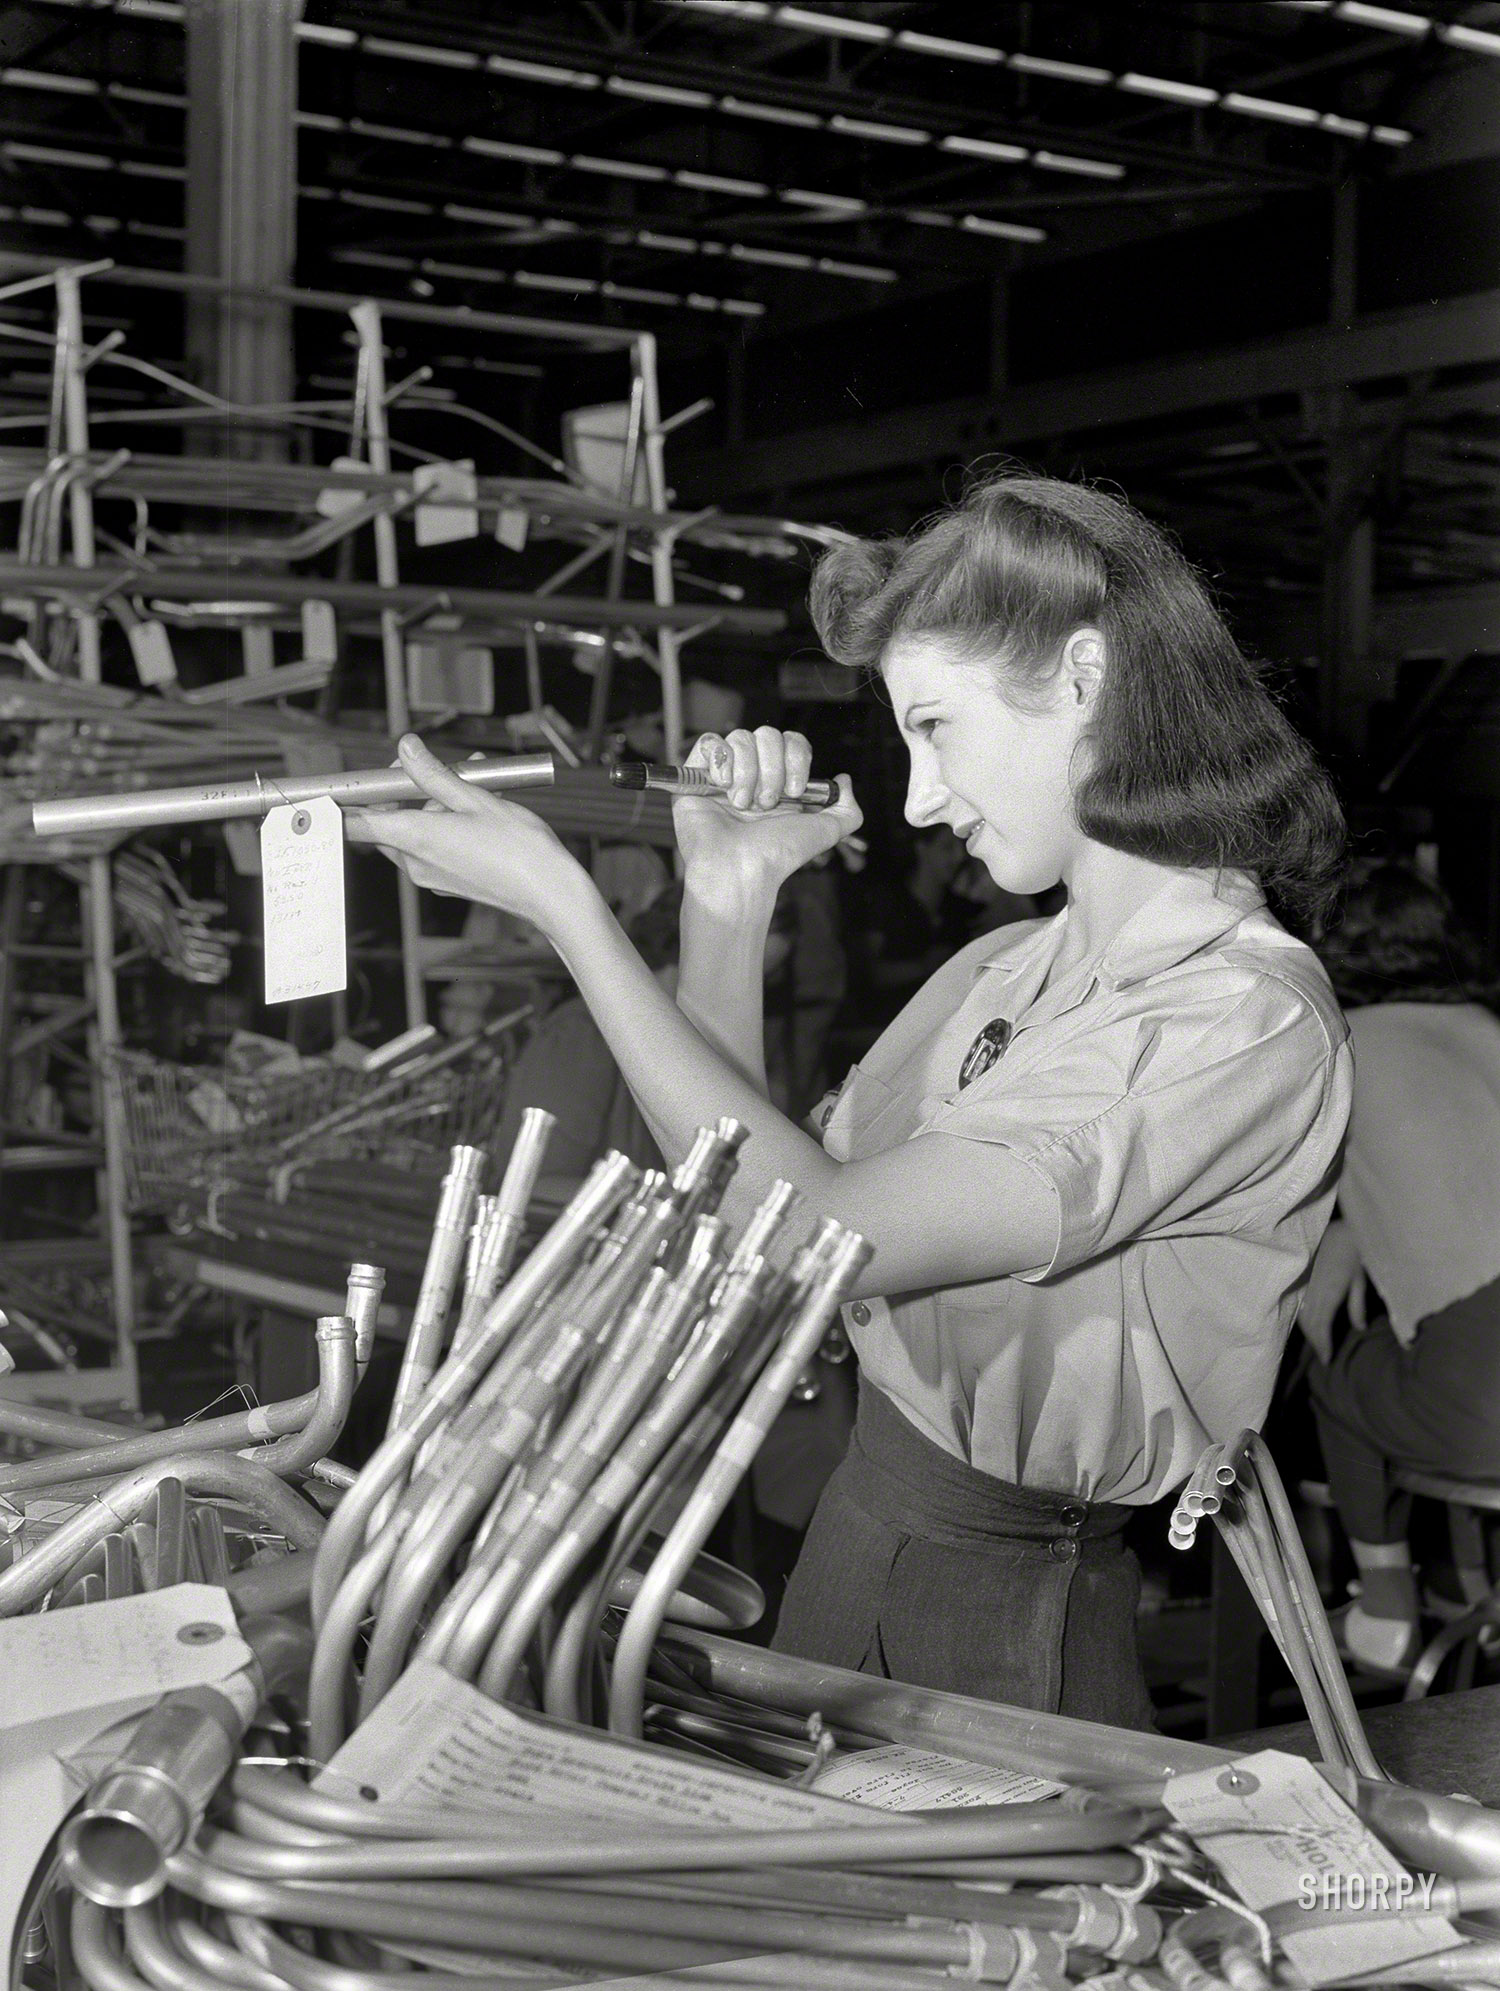 July 1942. "Ford bomber plant at Willow Run, Michigan. Inspection of more than a thousand separate tubing pieces composing the fuel, hydraulic, de-icing and other systems in a bomber is a highly important job. This young employee at the giant Willow Run plant uses her tiny flashlight to discover any internal defects in the tubing." Photo by Ann Rosener, Office of War Information. View full size.